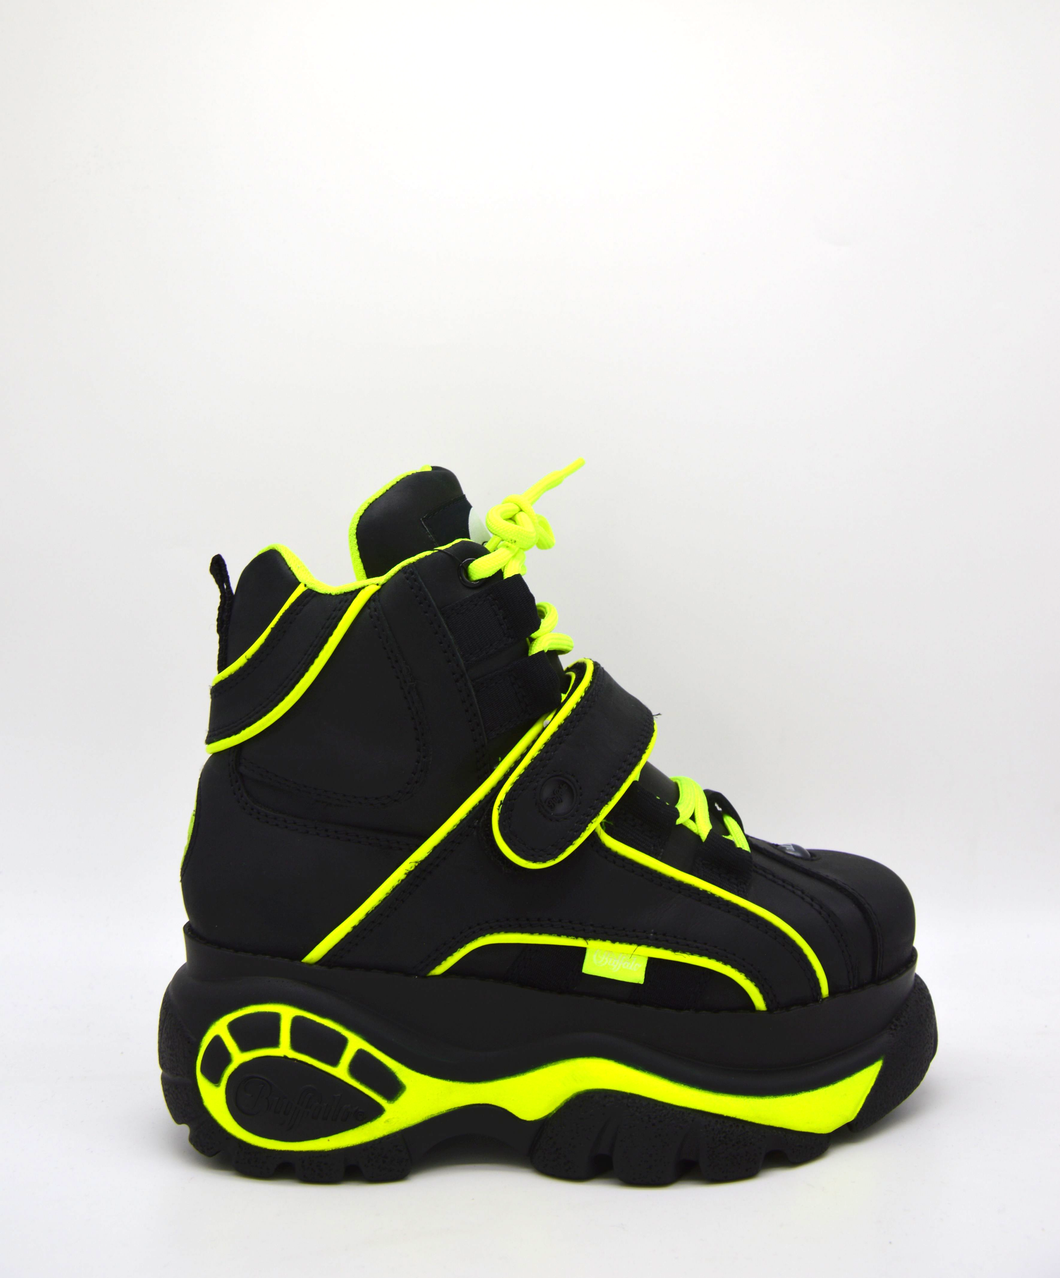 Buffalo London Classic Boots Shoes Platform Shoes 90s NEON Yellow 1348-14 2.0 (Limited by ModeRockCenter)